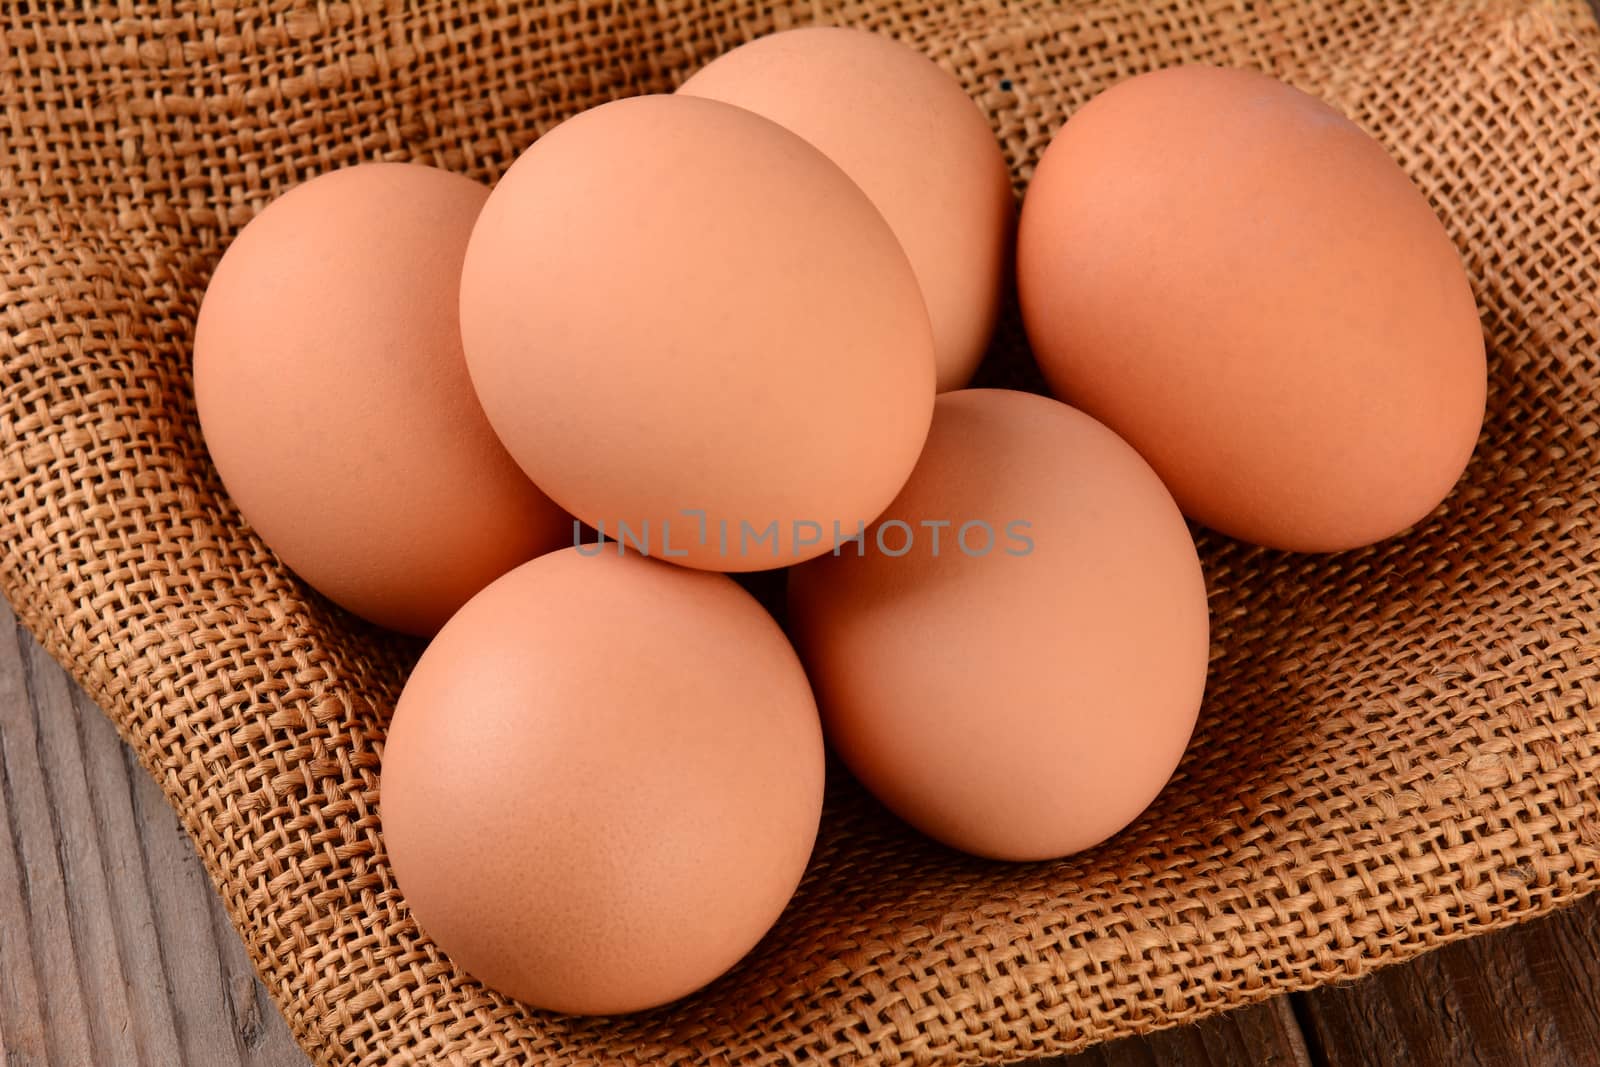 High angle shot of a group of brown eggs on a burlap sack. Horizontal format on a rustic wood surface.